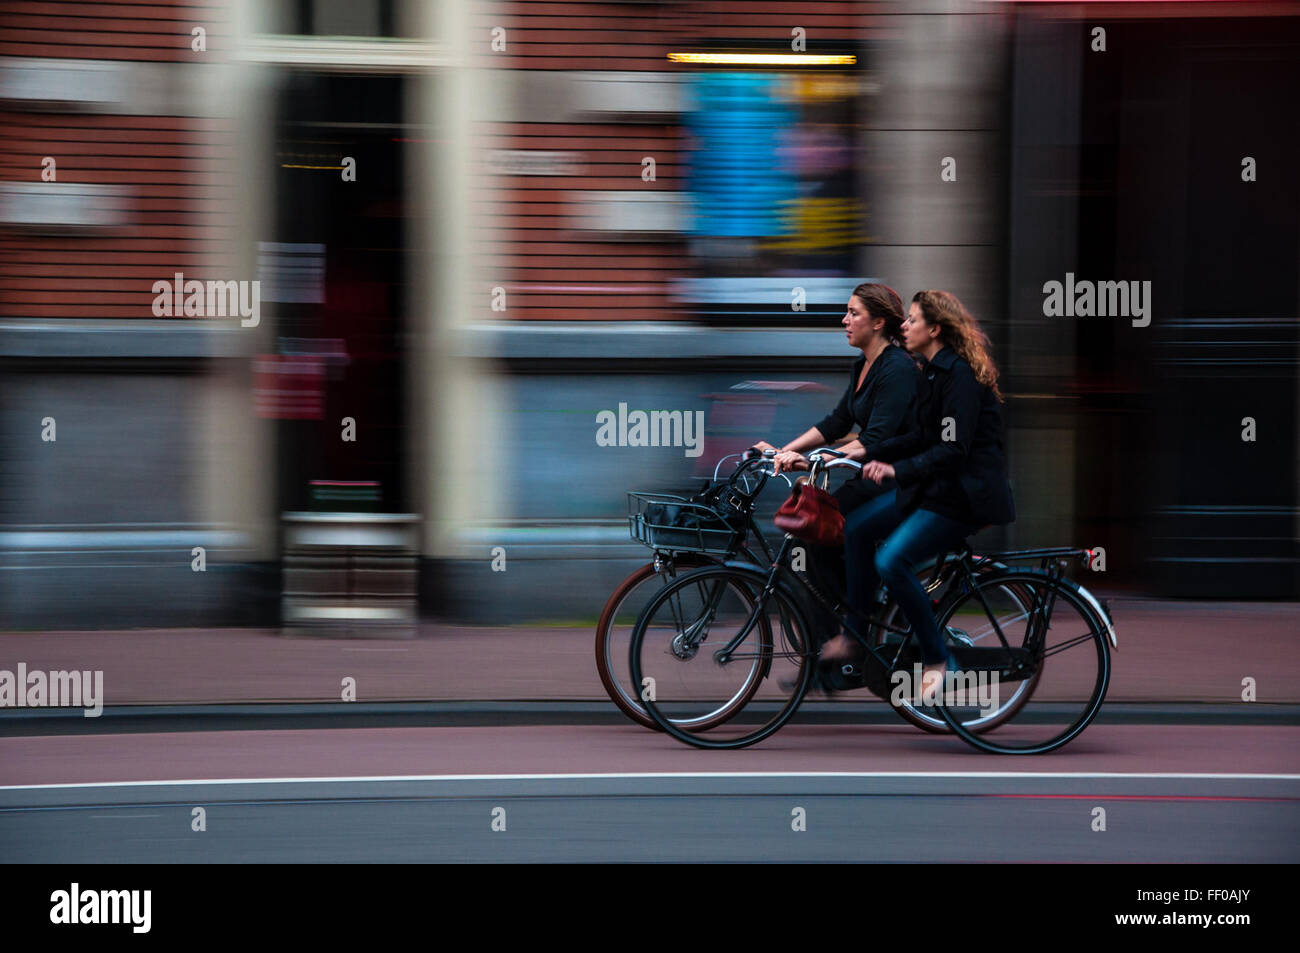 Female Bicyclists Riding Side by Side Female Bicyclists Riding Side by Side Stock Photo